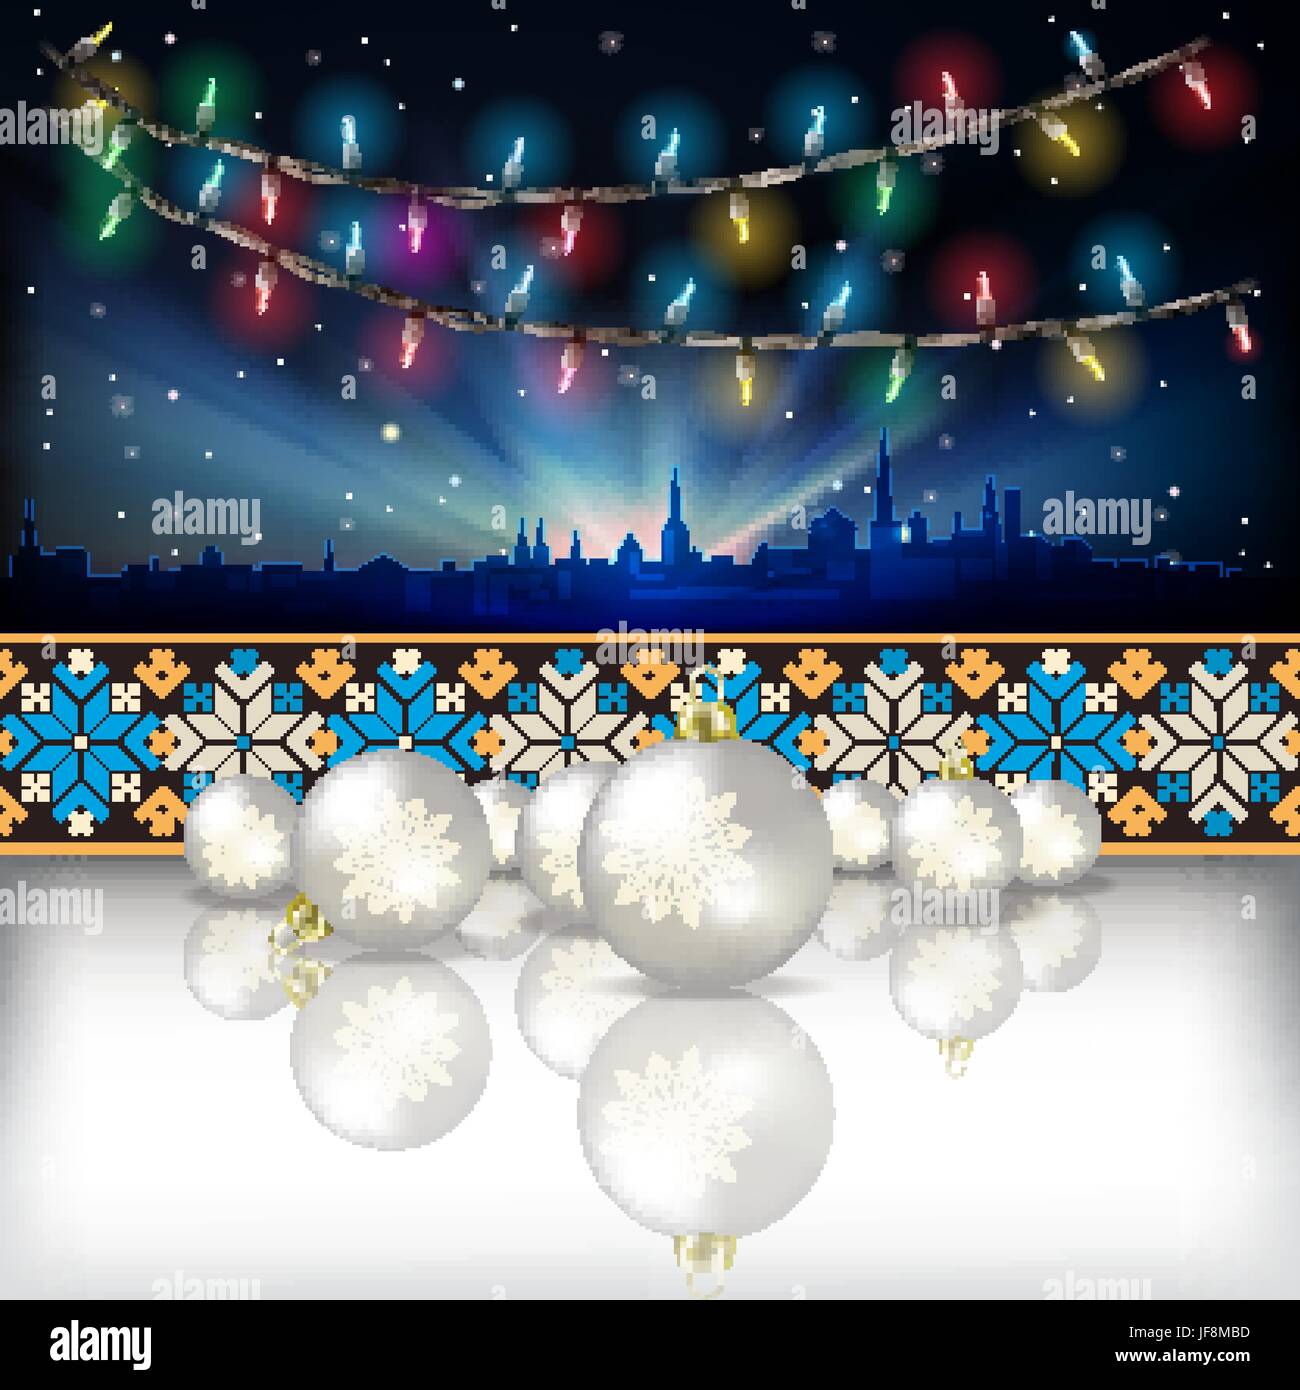 Abstract celebration background with Christmas decorations Stock Vector